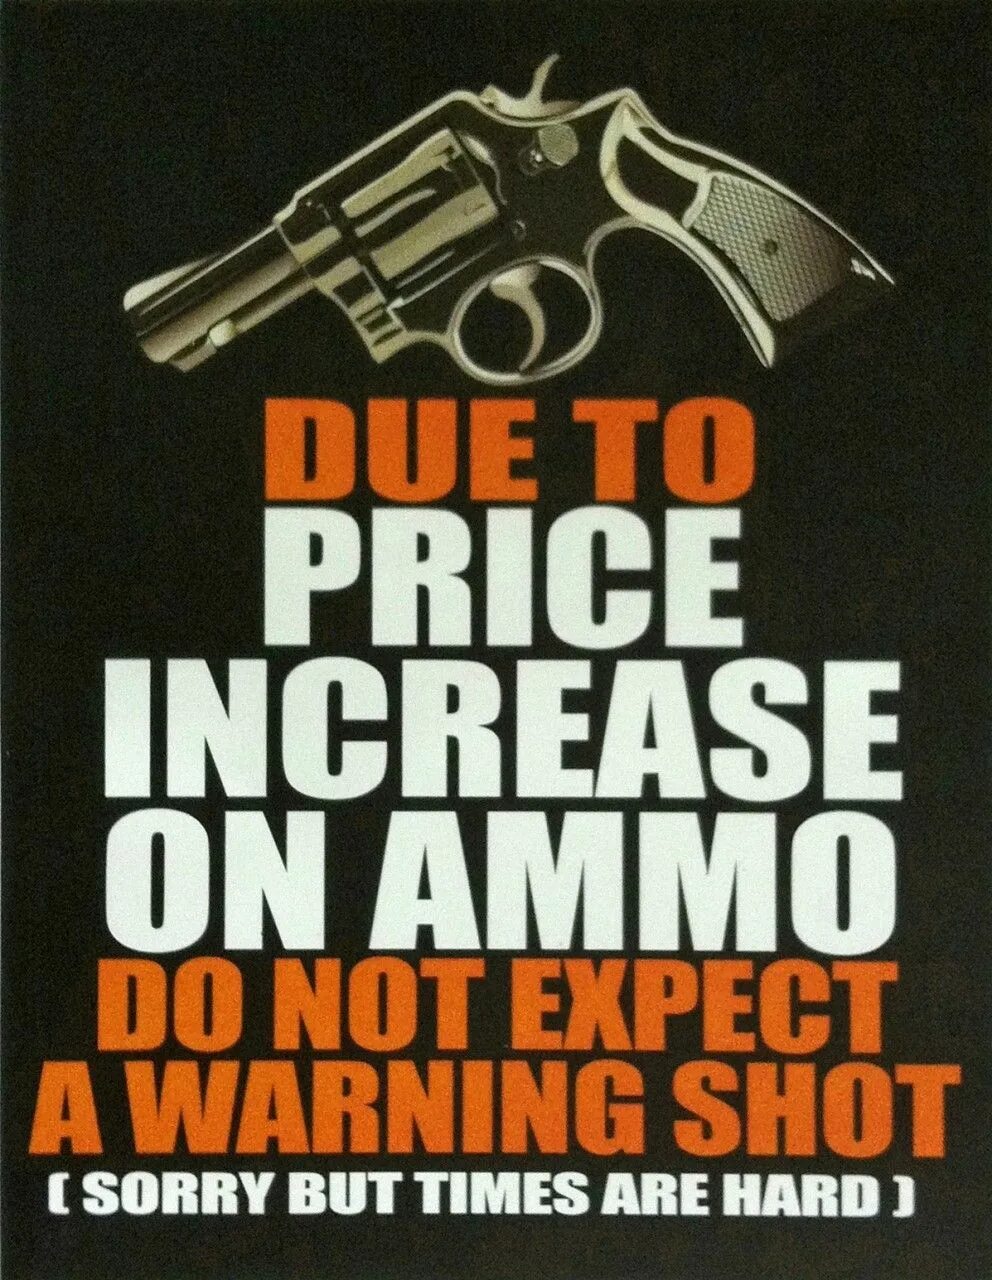 Due to Price increase on Ammo. Do not expect футболка. Ammo Постер Святой Винсент. Increase Gun. Did not expect this